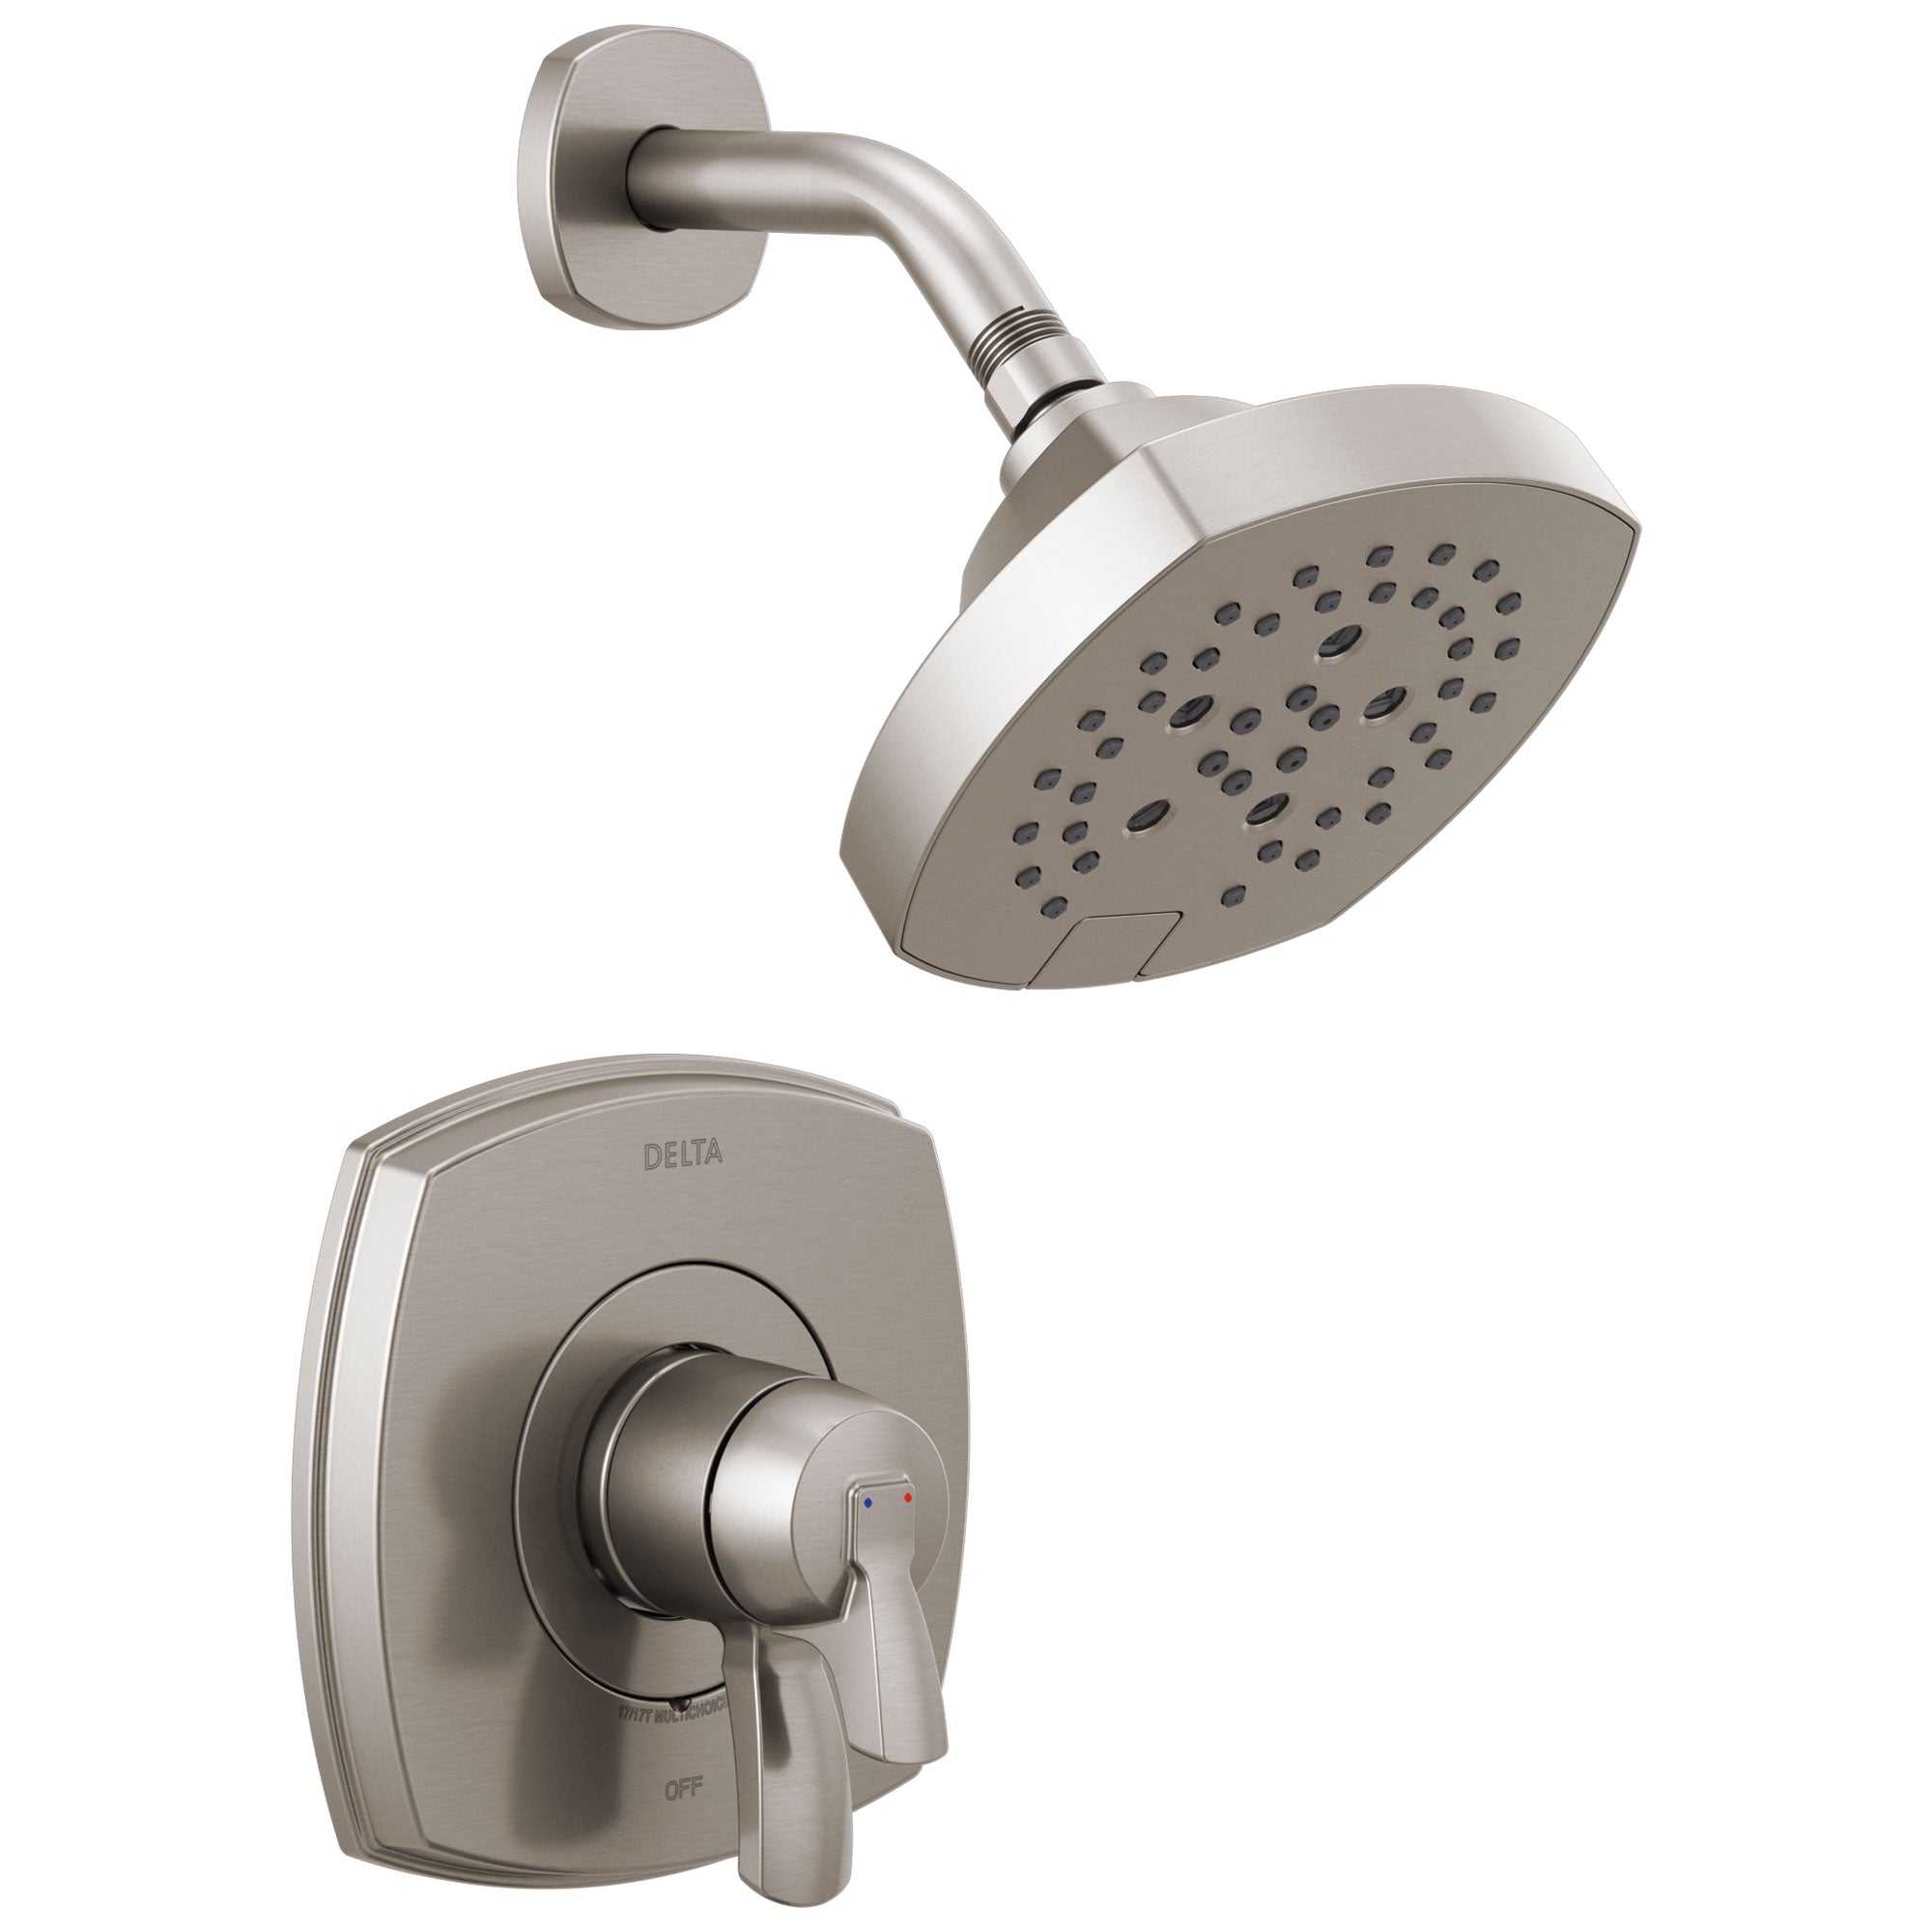 Delta Stryke Stainless Steel Finish Monitor 17 Series Shower Only Faucet Includes Handles, Cartridge, and Valve with Stops D3364V